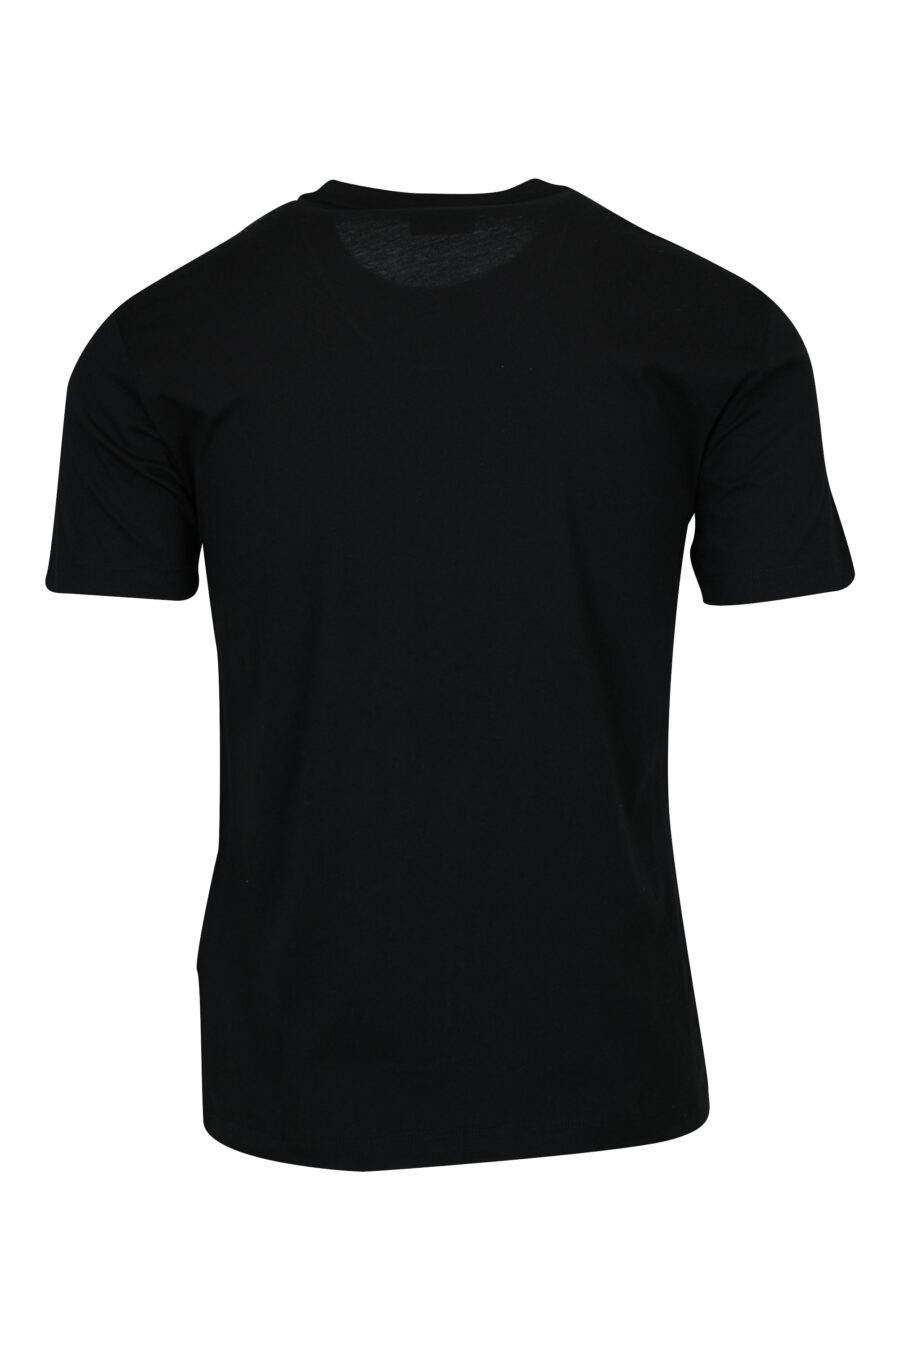 Black T-shirt with "lux identity" maxilogo in gradient - 8058947508099 1